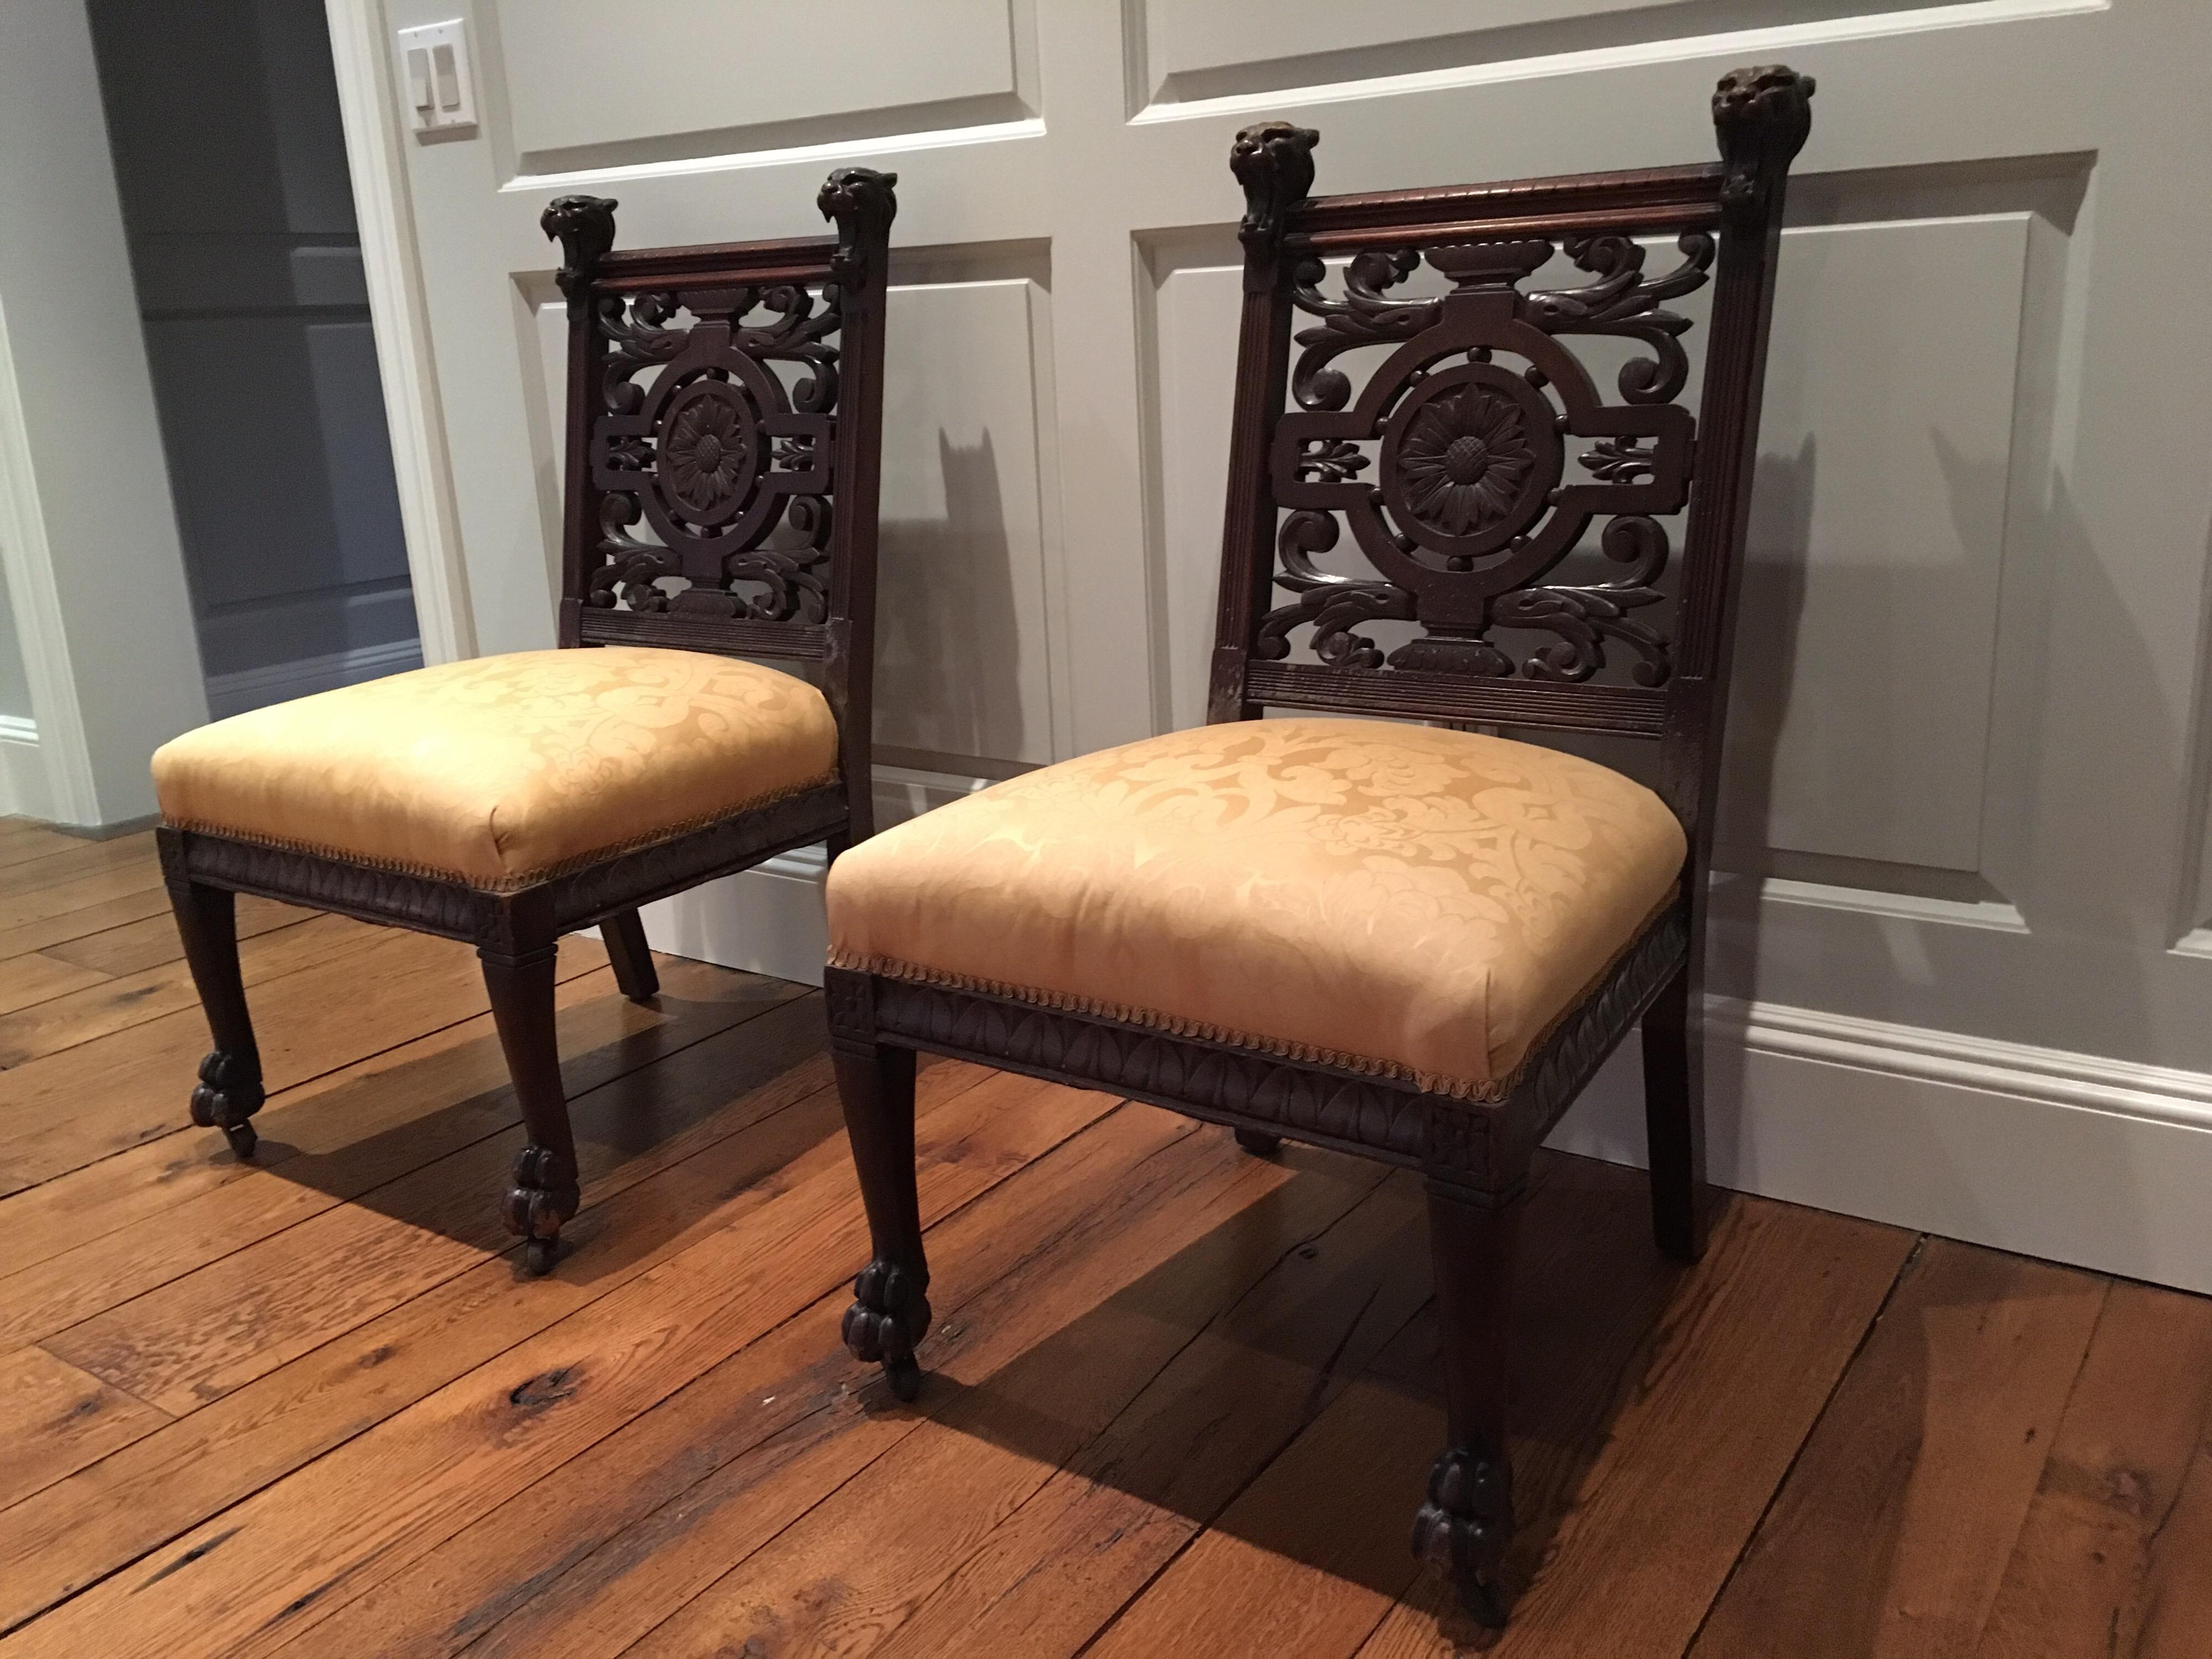 Pair of Late 19th century side chairs, aesthetic movement, circa 1890. Ornate, heavily carved backs central floral carving with tiger head and paw carvings. On casters. Minor chip on the front rail. Good structurally condition. Minor scratches to